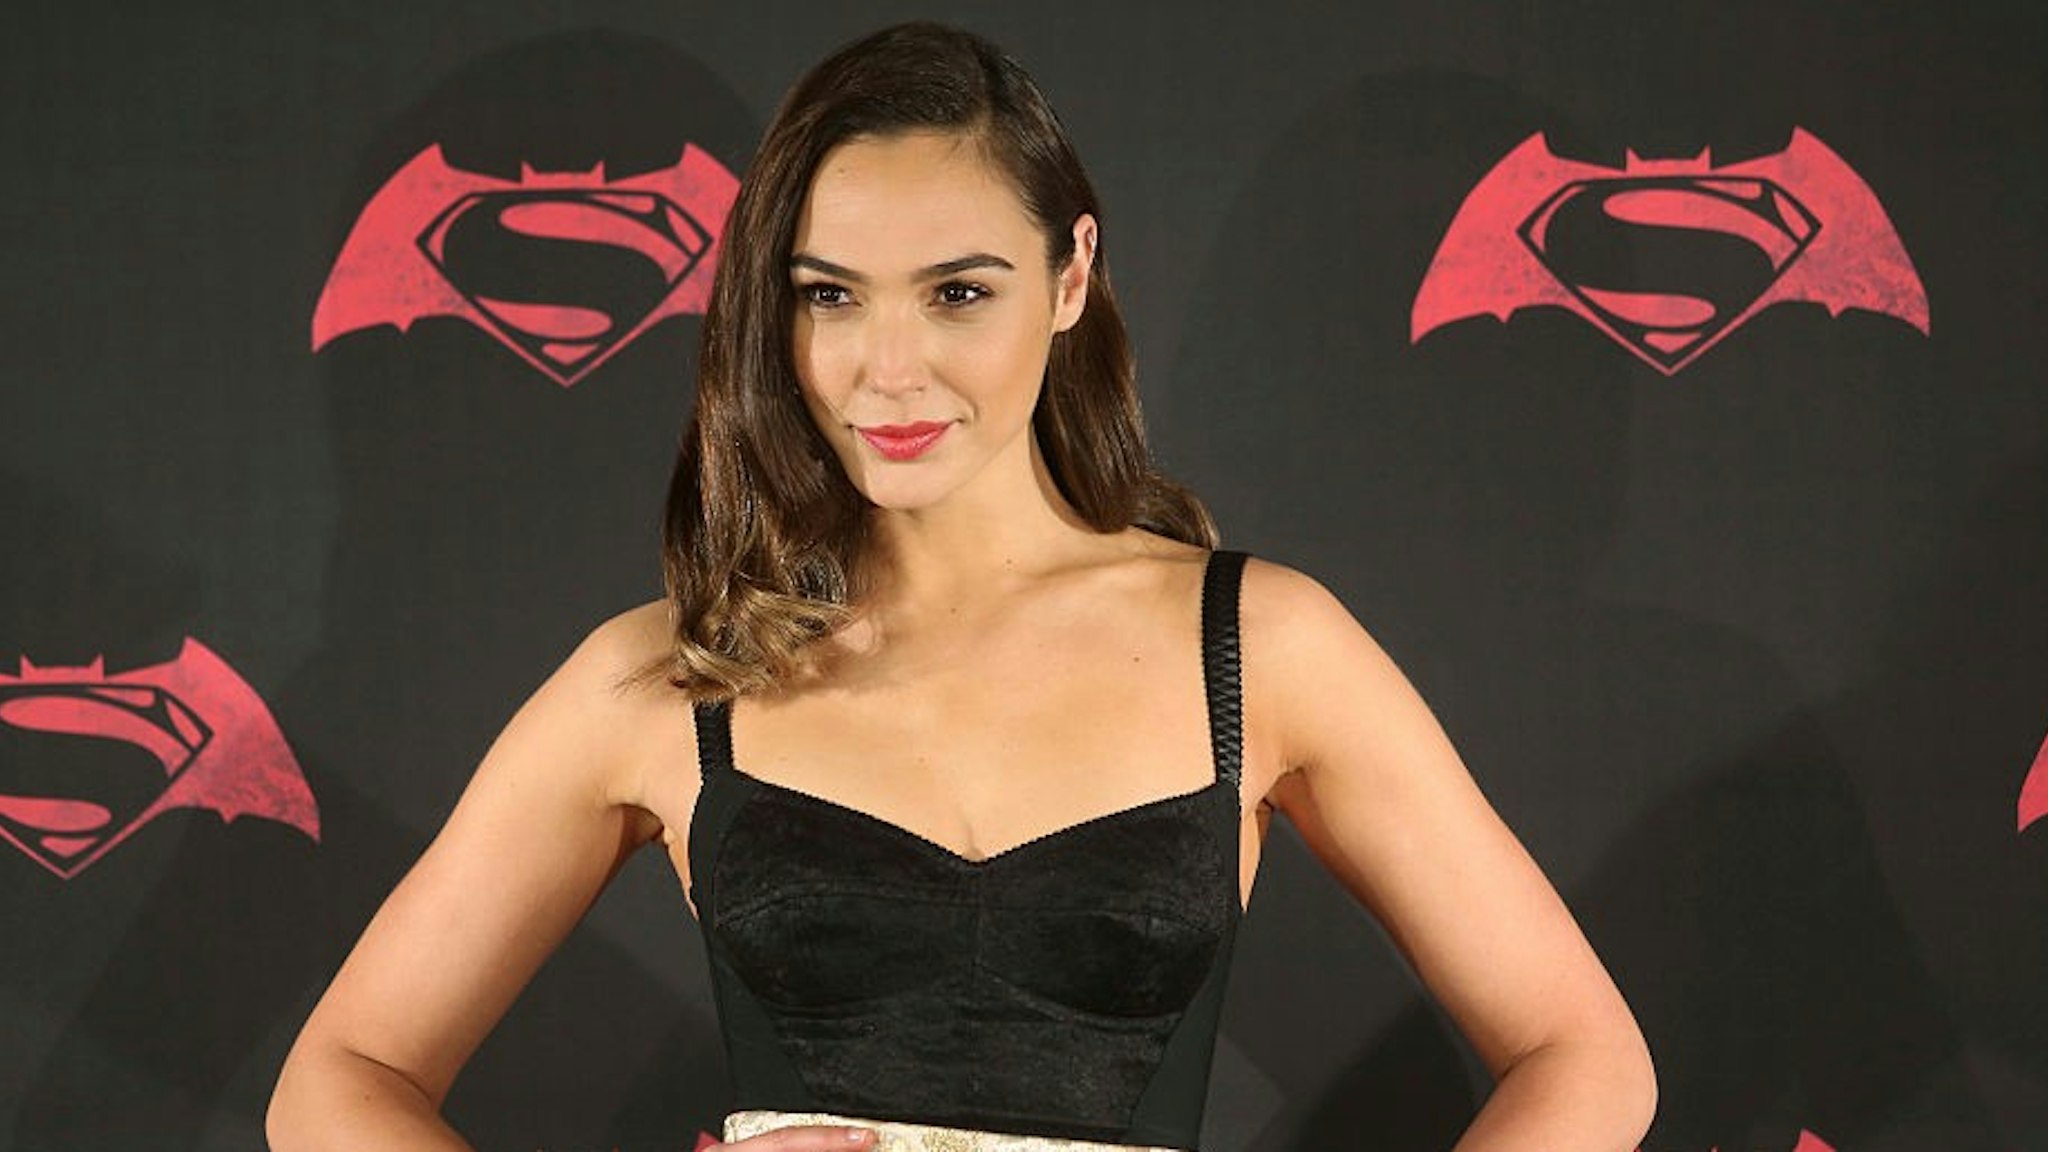 MEXICO CITY, MEXICO - MARCH 19: Israeli actress Gal Gadot poses for pictures during the Batman v Superman Movie photocall at St Regis Hotel on March 19, 2016 in Mexico City, Mexico. (Photo by